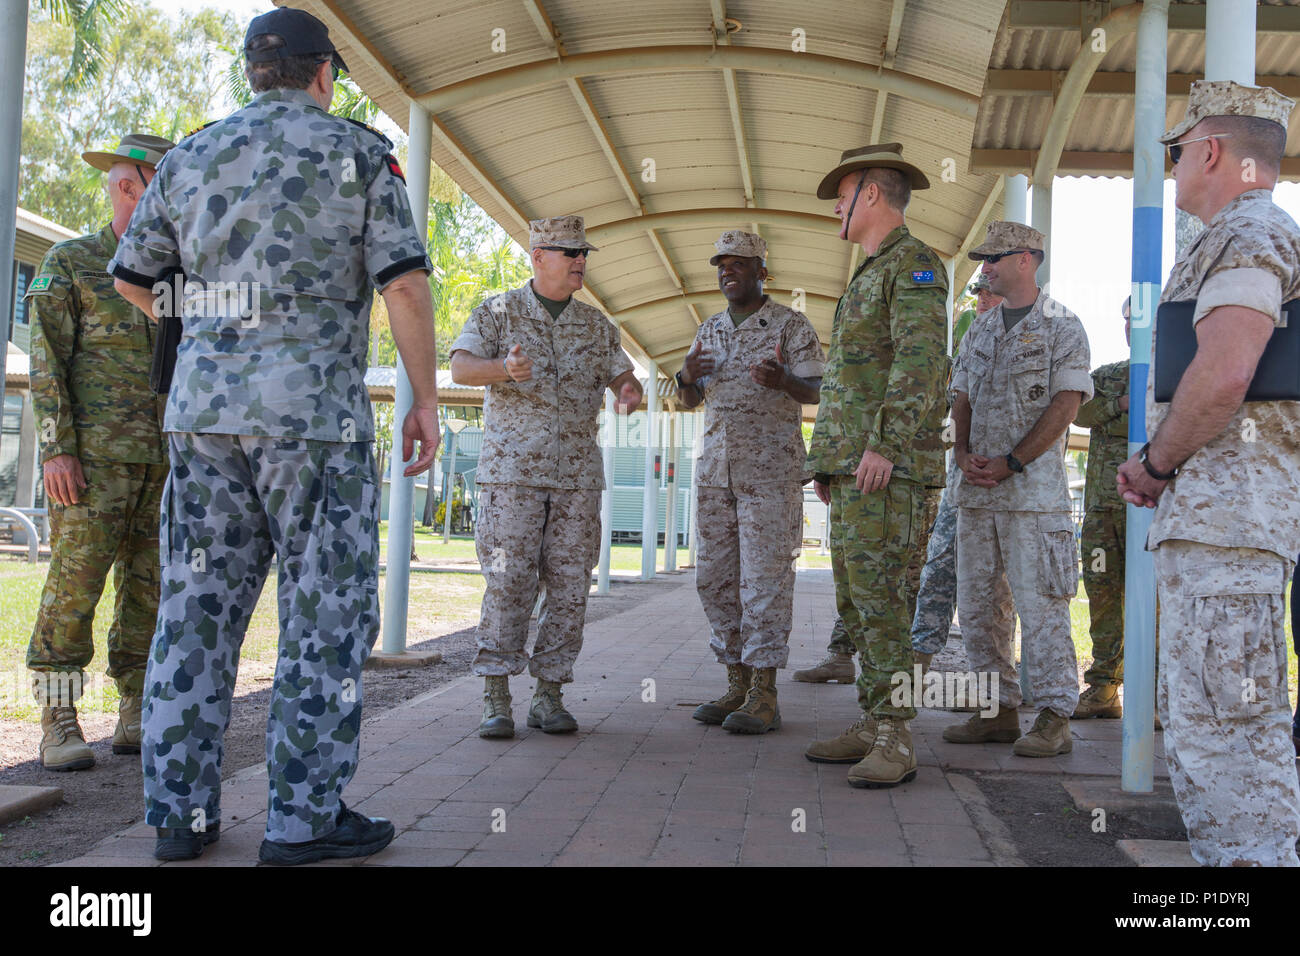 Commandant of the Marine Corps Gen. Robert B. Neller and Sgt. Maj. Ronald L. Green, sergeant major the Marine Corps, speak with Australian Army soldiers at Robertson Barracks, Darwin, Australia, Oct. 17, 2016. Neller and Green visited Darwin to meet with Australian Army leadership and tour facilities. (U.S. Marine Corps photo by Cpl. Samantha K. Braun) Stock Photo